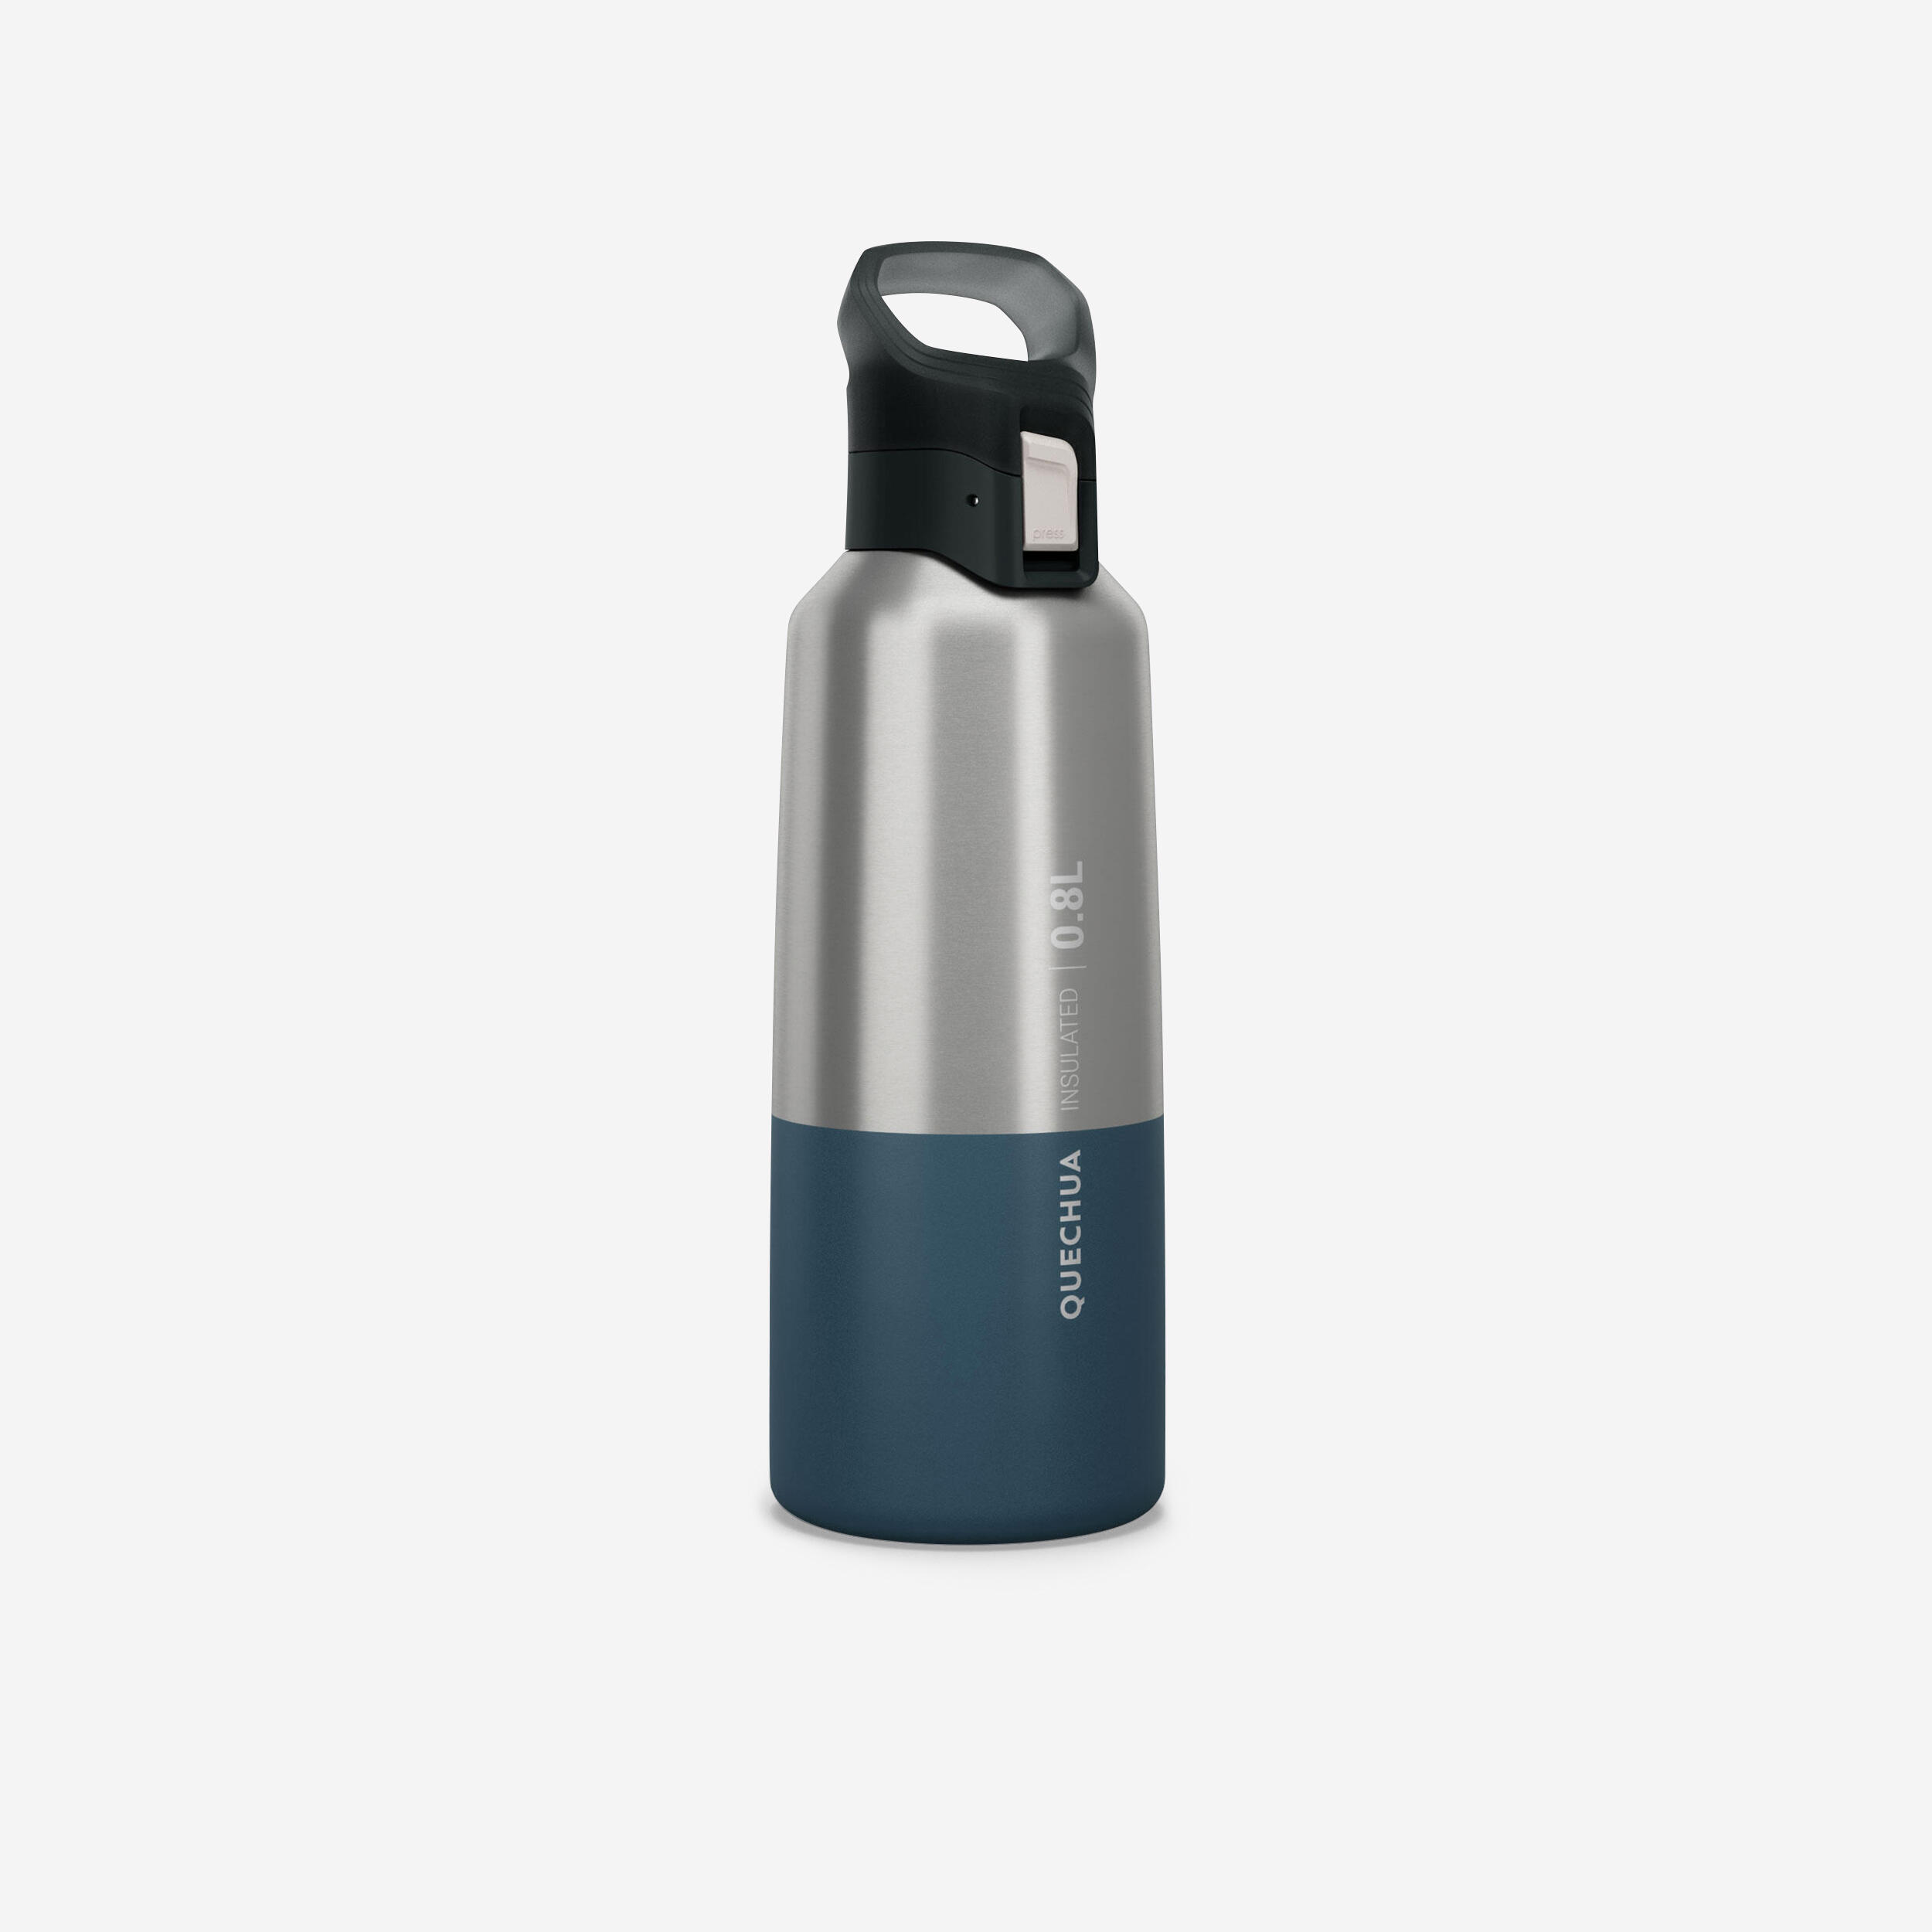 MH500 insulated hiking flask 0.8 L